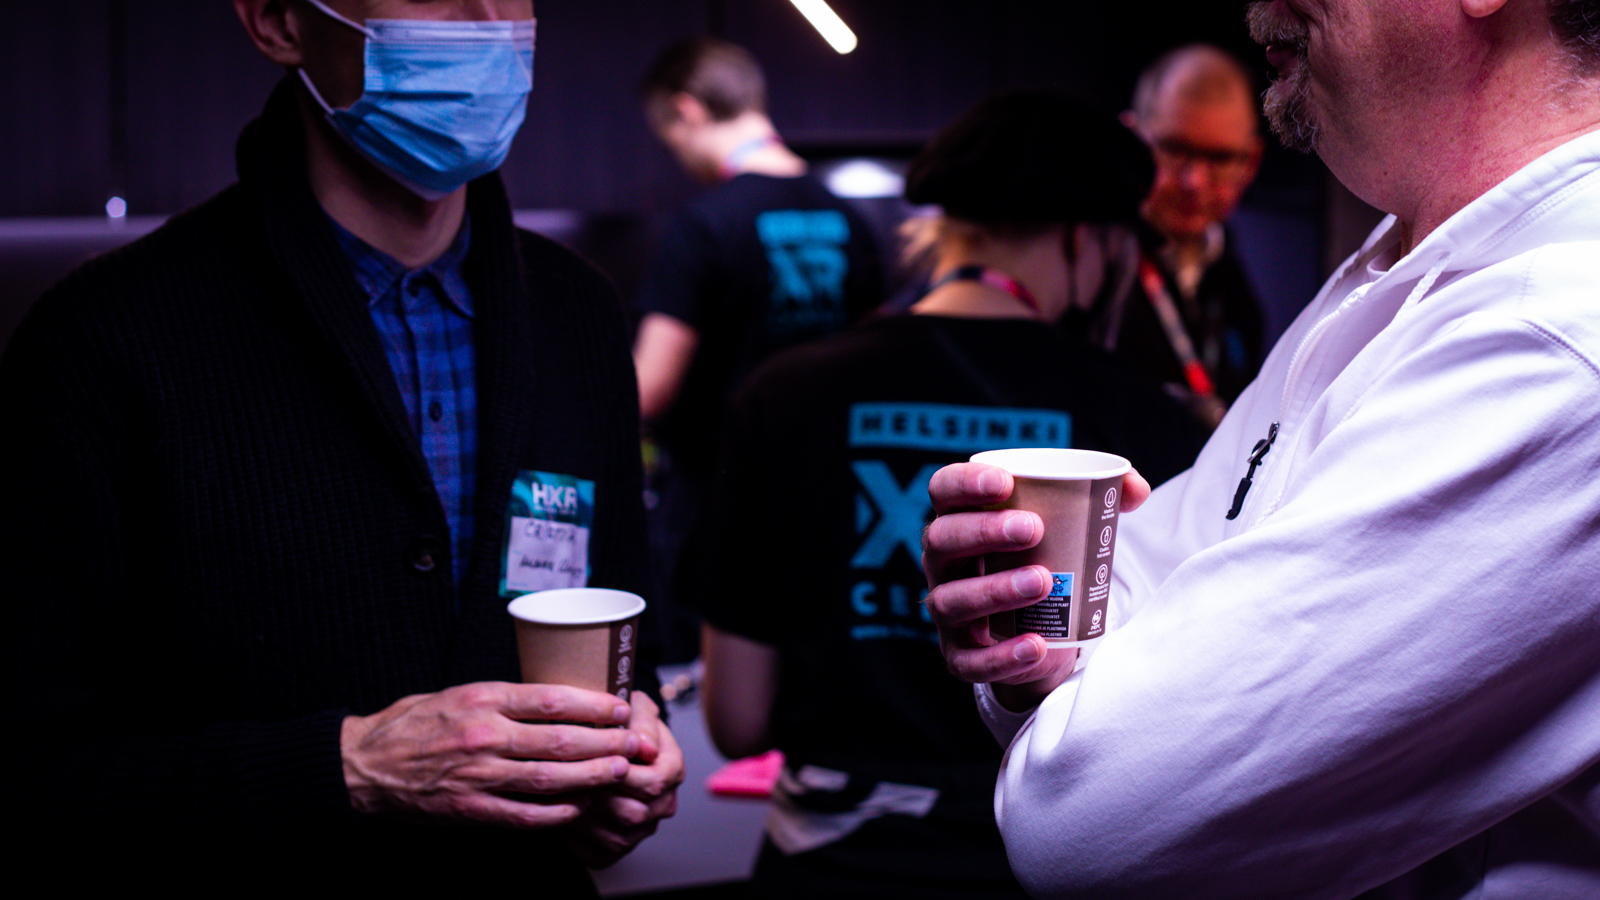 Two people talking at an event, with a zoom on their hands holding paper cups.